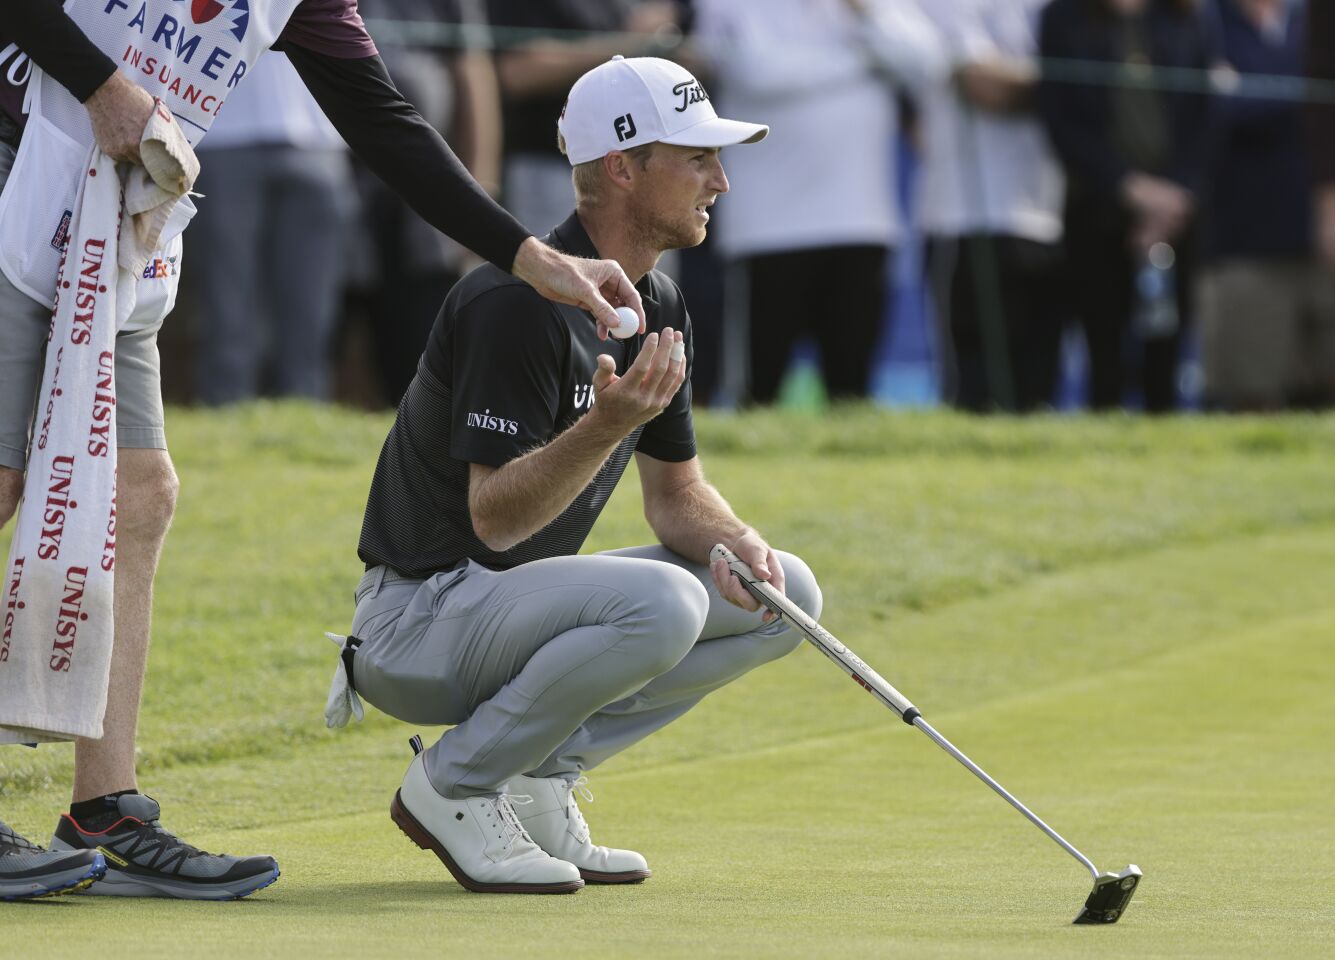 Will Zalatoris gets a ball from his caddie as he prepares to putt on the South Course's 13th green during the third round of the Farmers Insurance Open on Jan. 28.